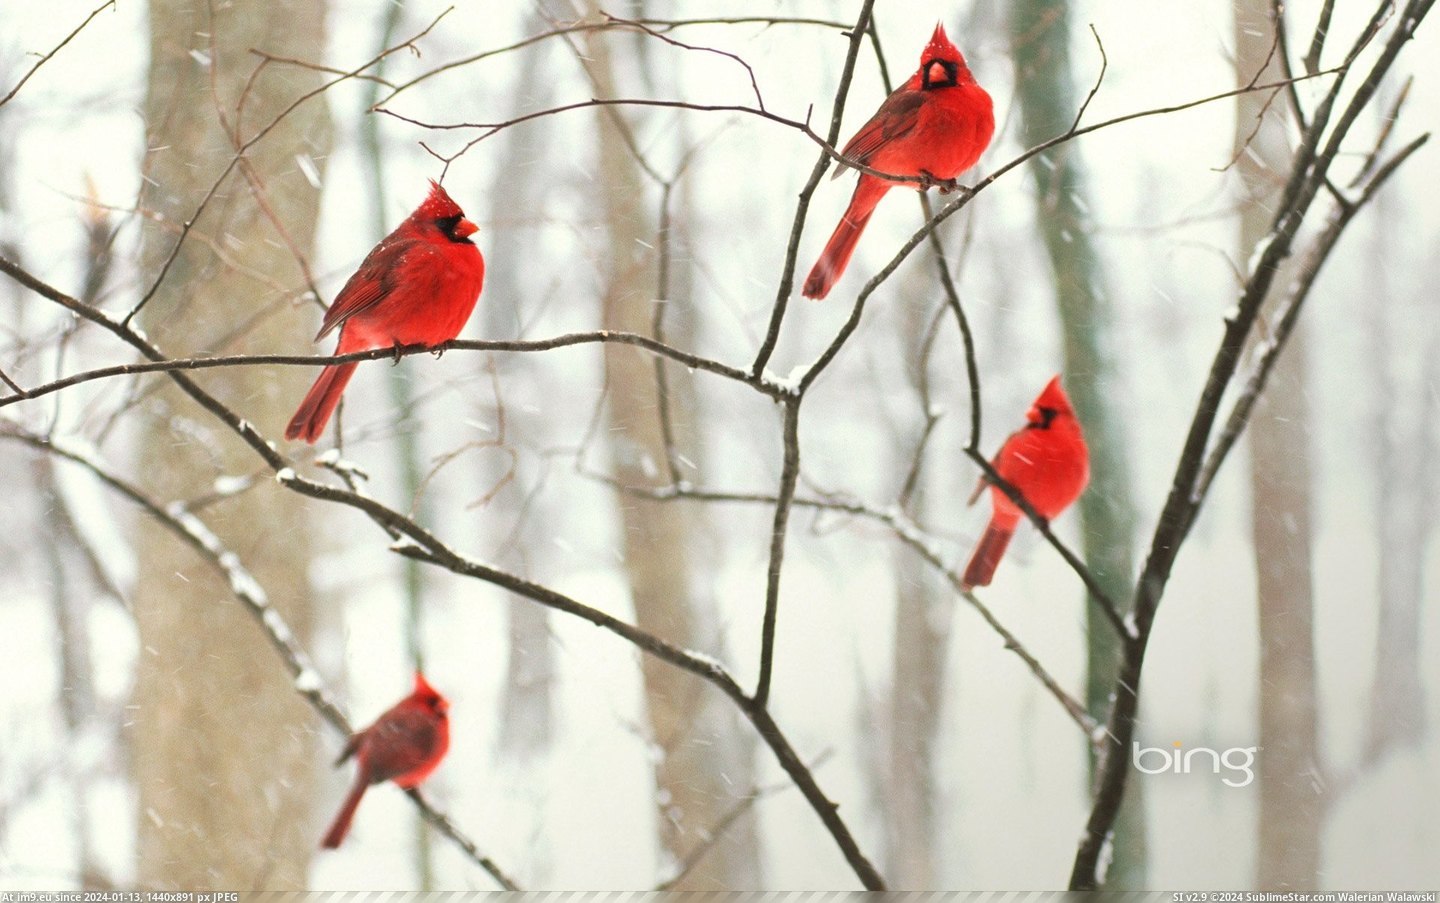 Male northern cardinals in the snow (©Alamy) (in December 2012 HD Wallpapers)